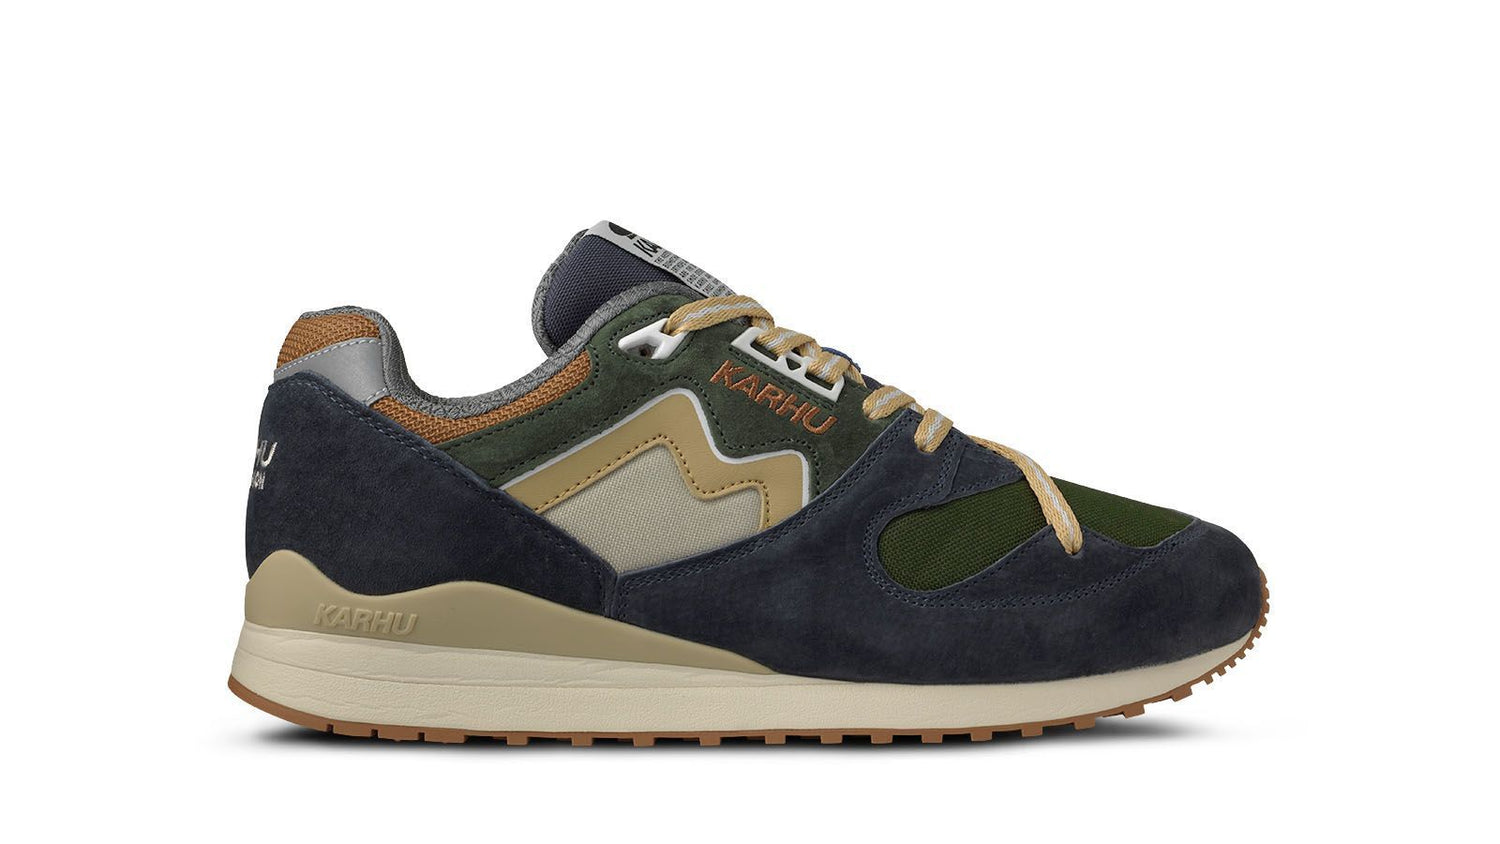 Share more than 108 karhu synchron classic sneaker latest